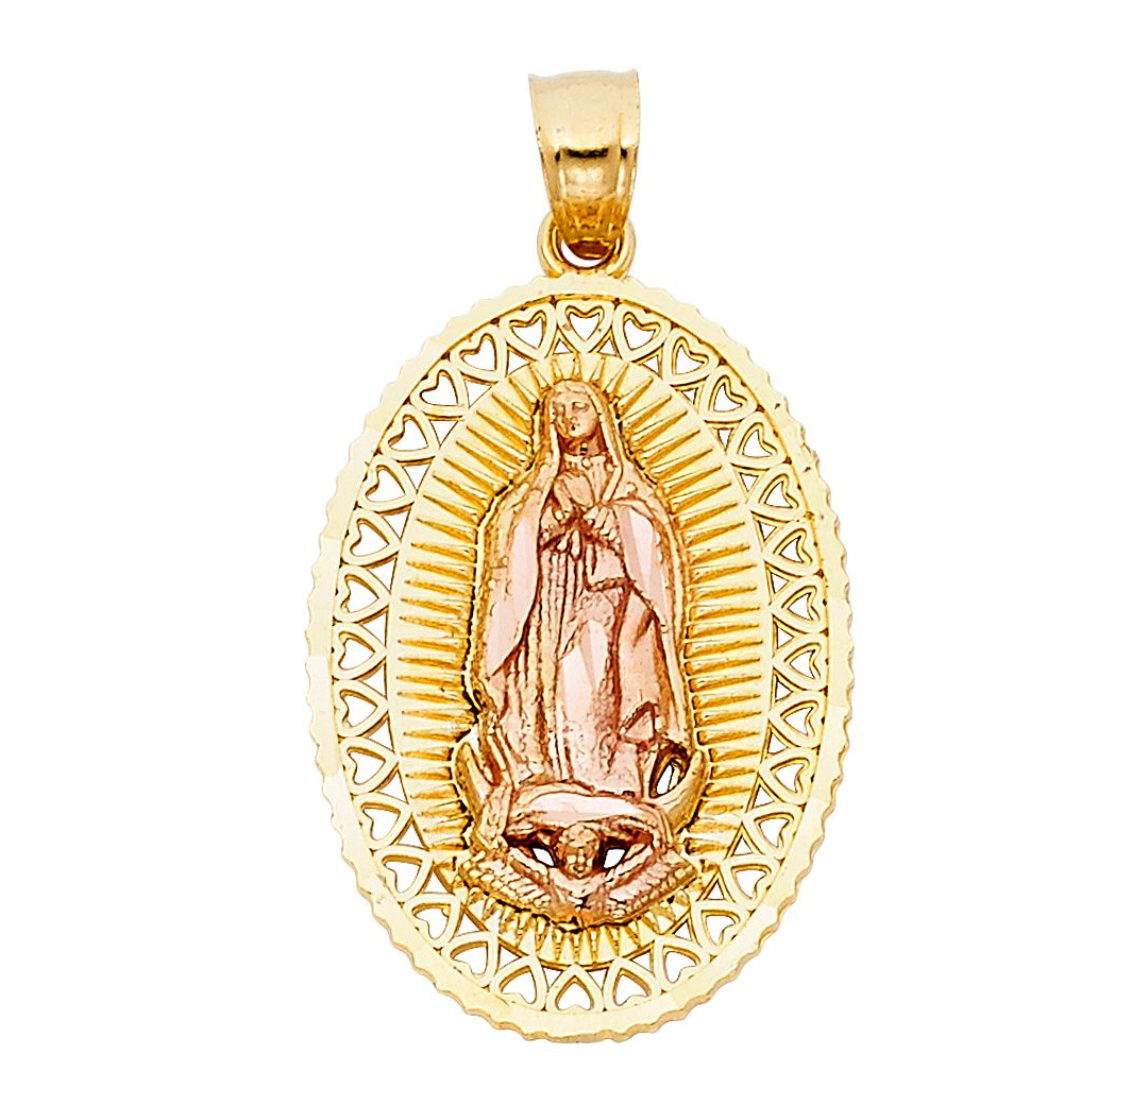 Gold Guadalupe Pendant Model-1105 - Charlie & Co. Jewelry